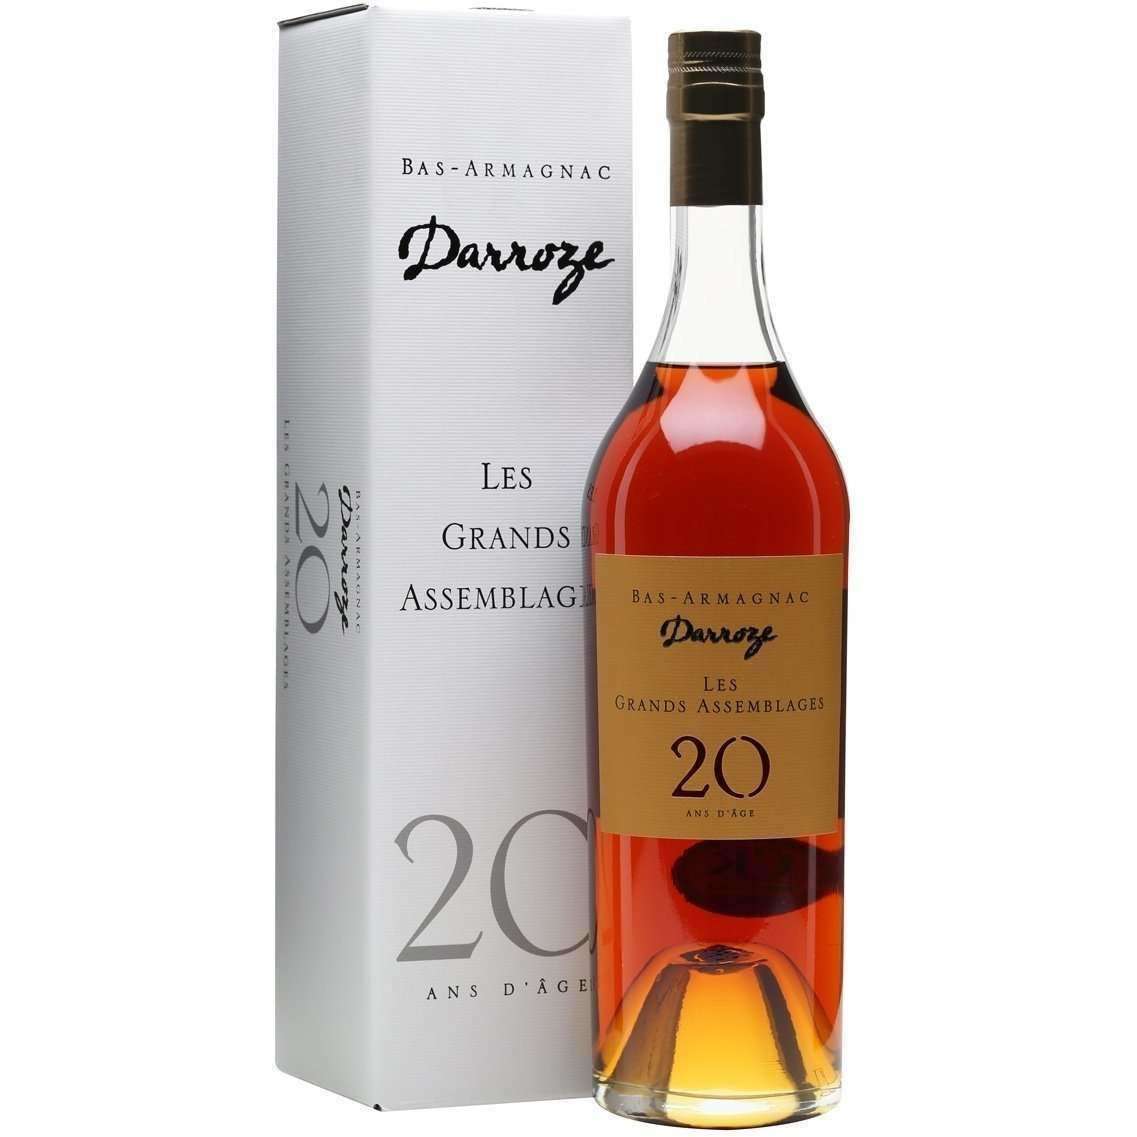 Francois Darroze 20 Year Old Armagnac - The General Wine Company